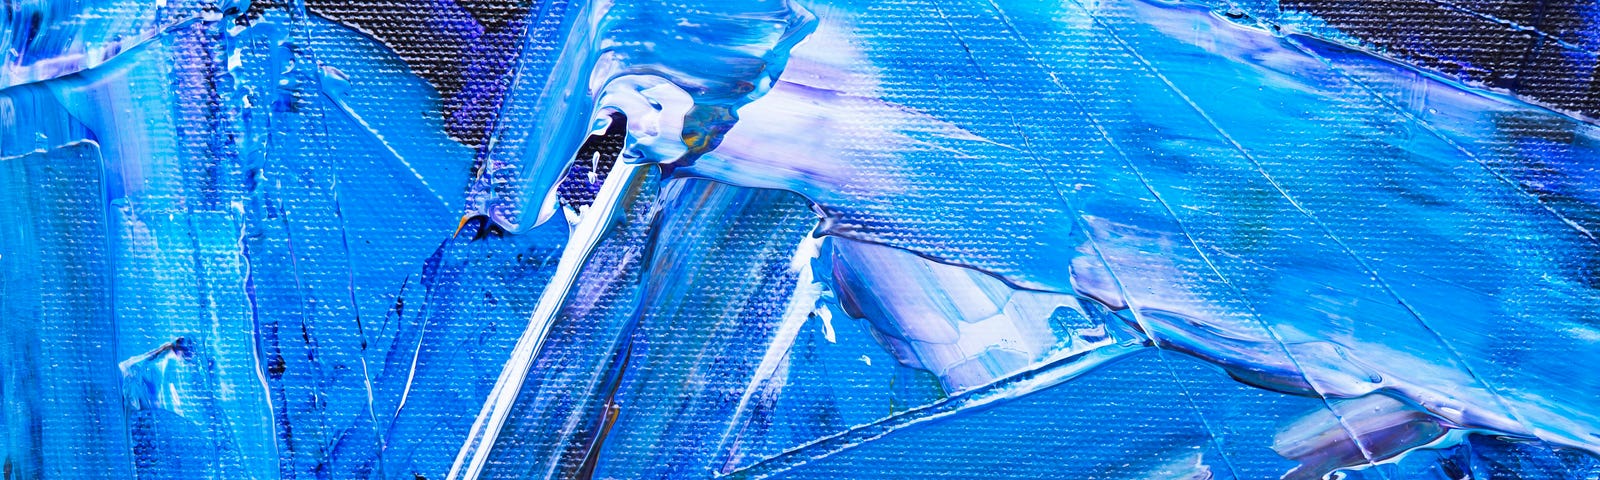 A close up of paint on a canvas with shades of primarily blue, but also white, yellow, and purple. The paint is applied in wide frenzied strokes. The texture of the paint on the canvas is very prominent.